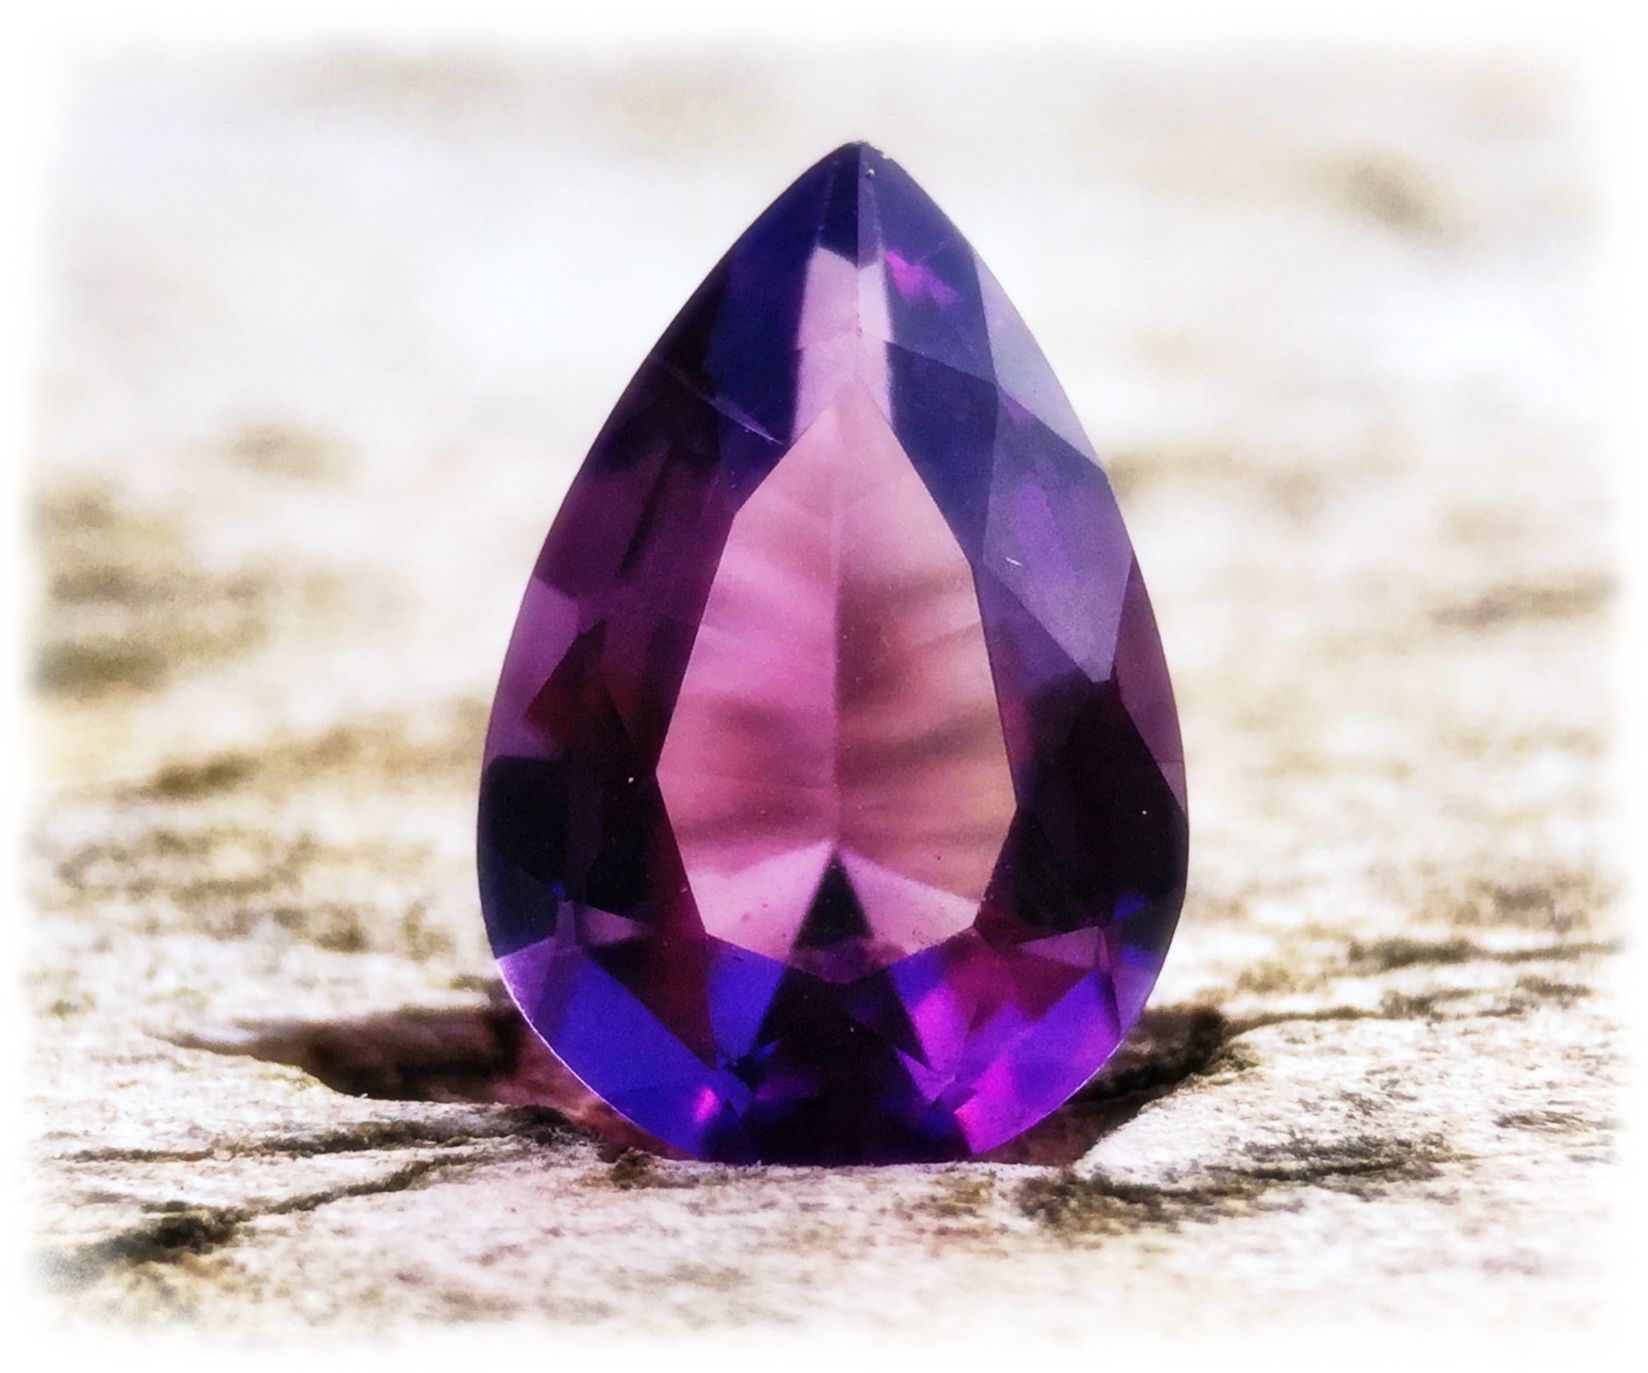 Benefits of Amethyst Stone and Crystal -(Sobriety Stone)